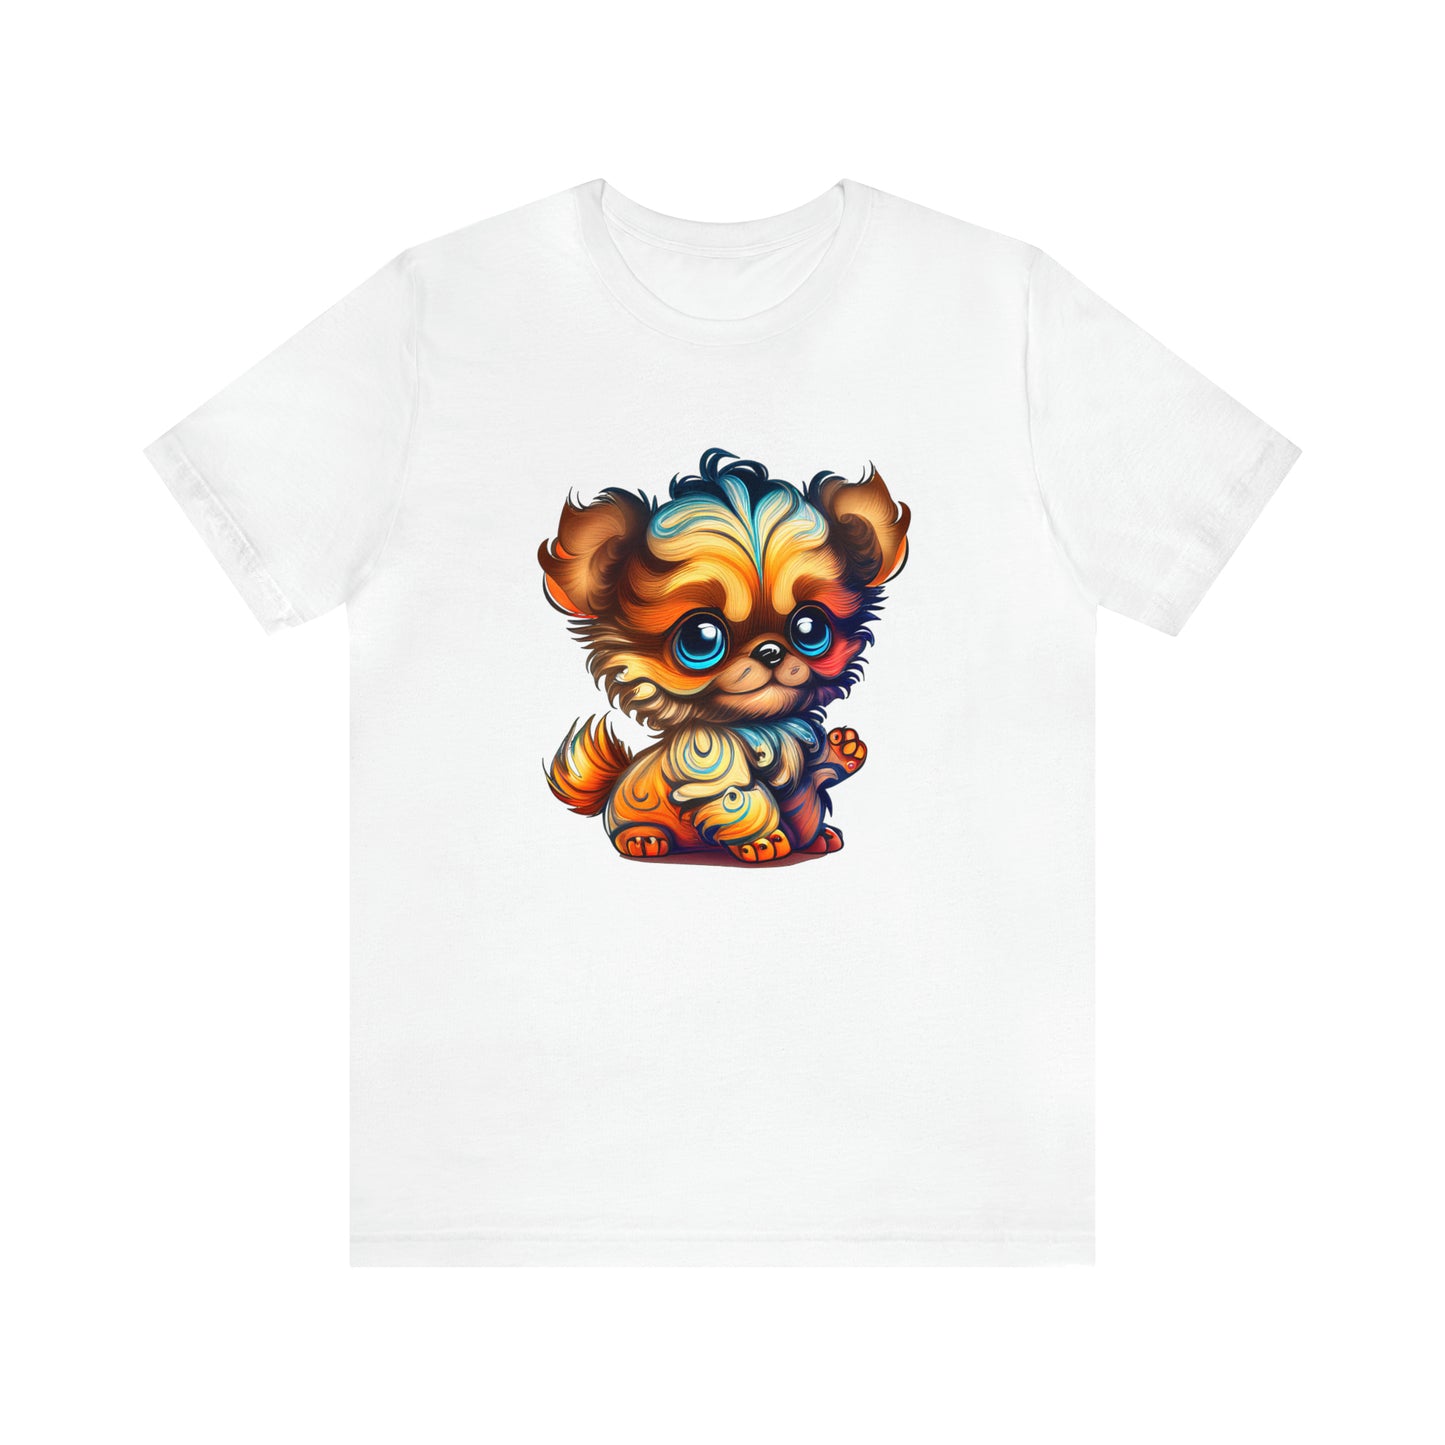 psychedelicBRANDz's Woof Wave Wonder featuring a cute puppy on a white shirt